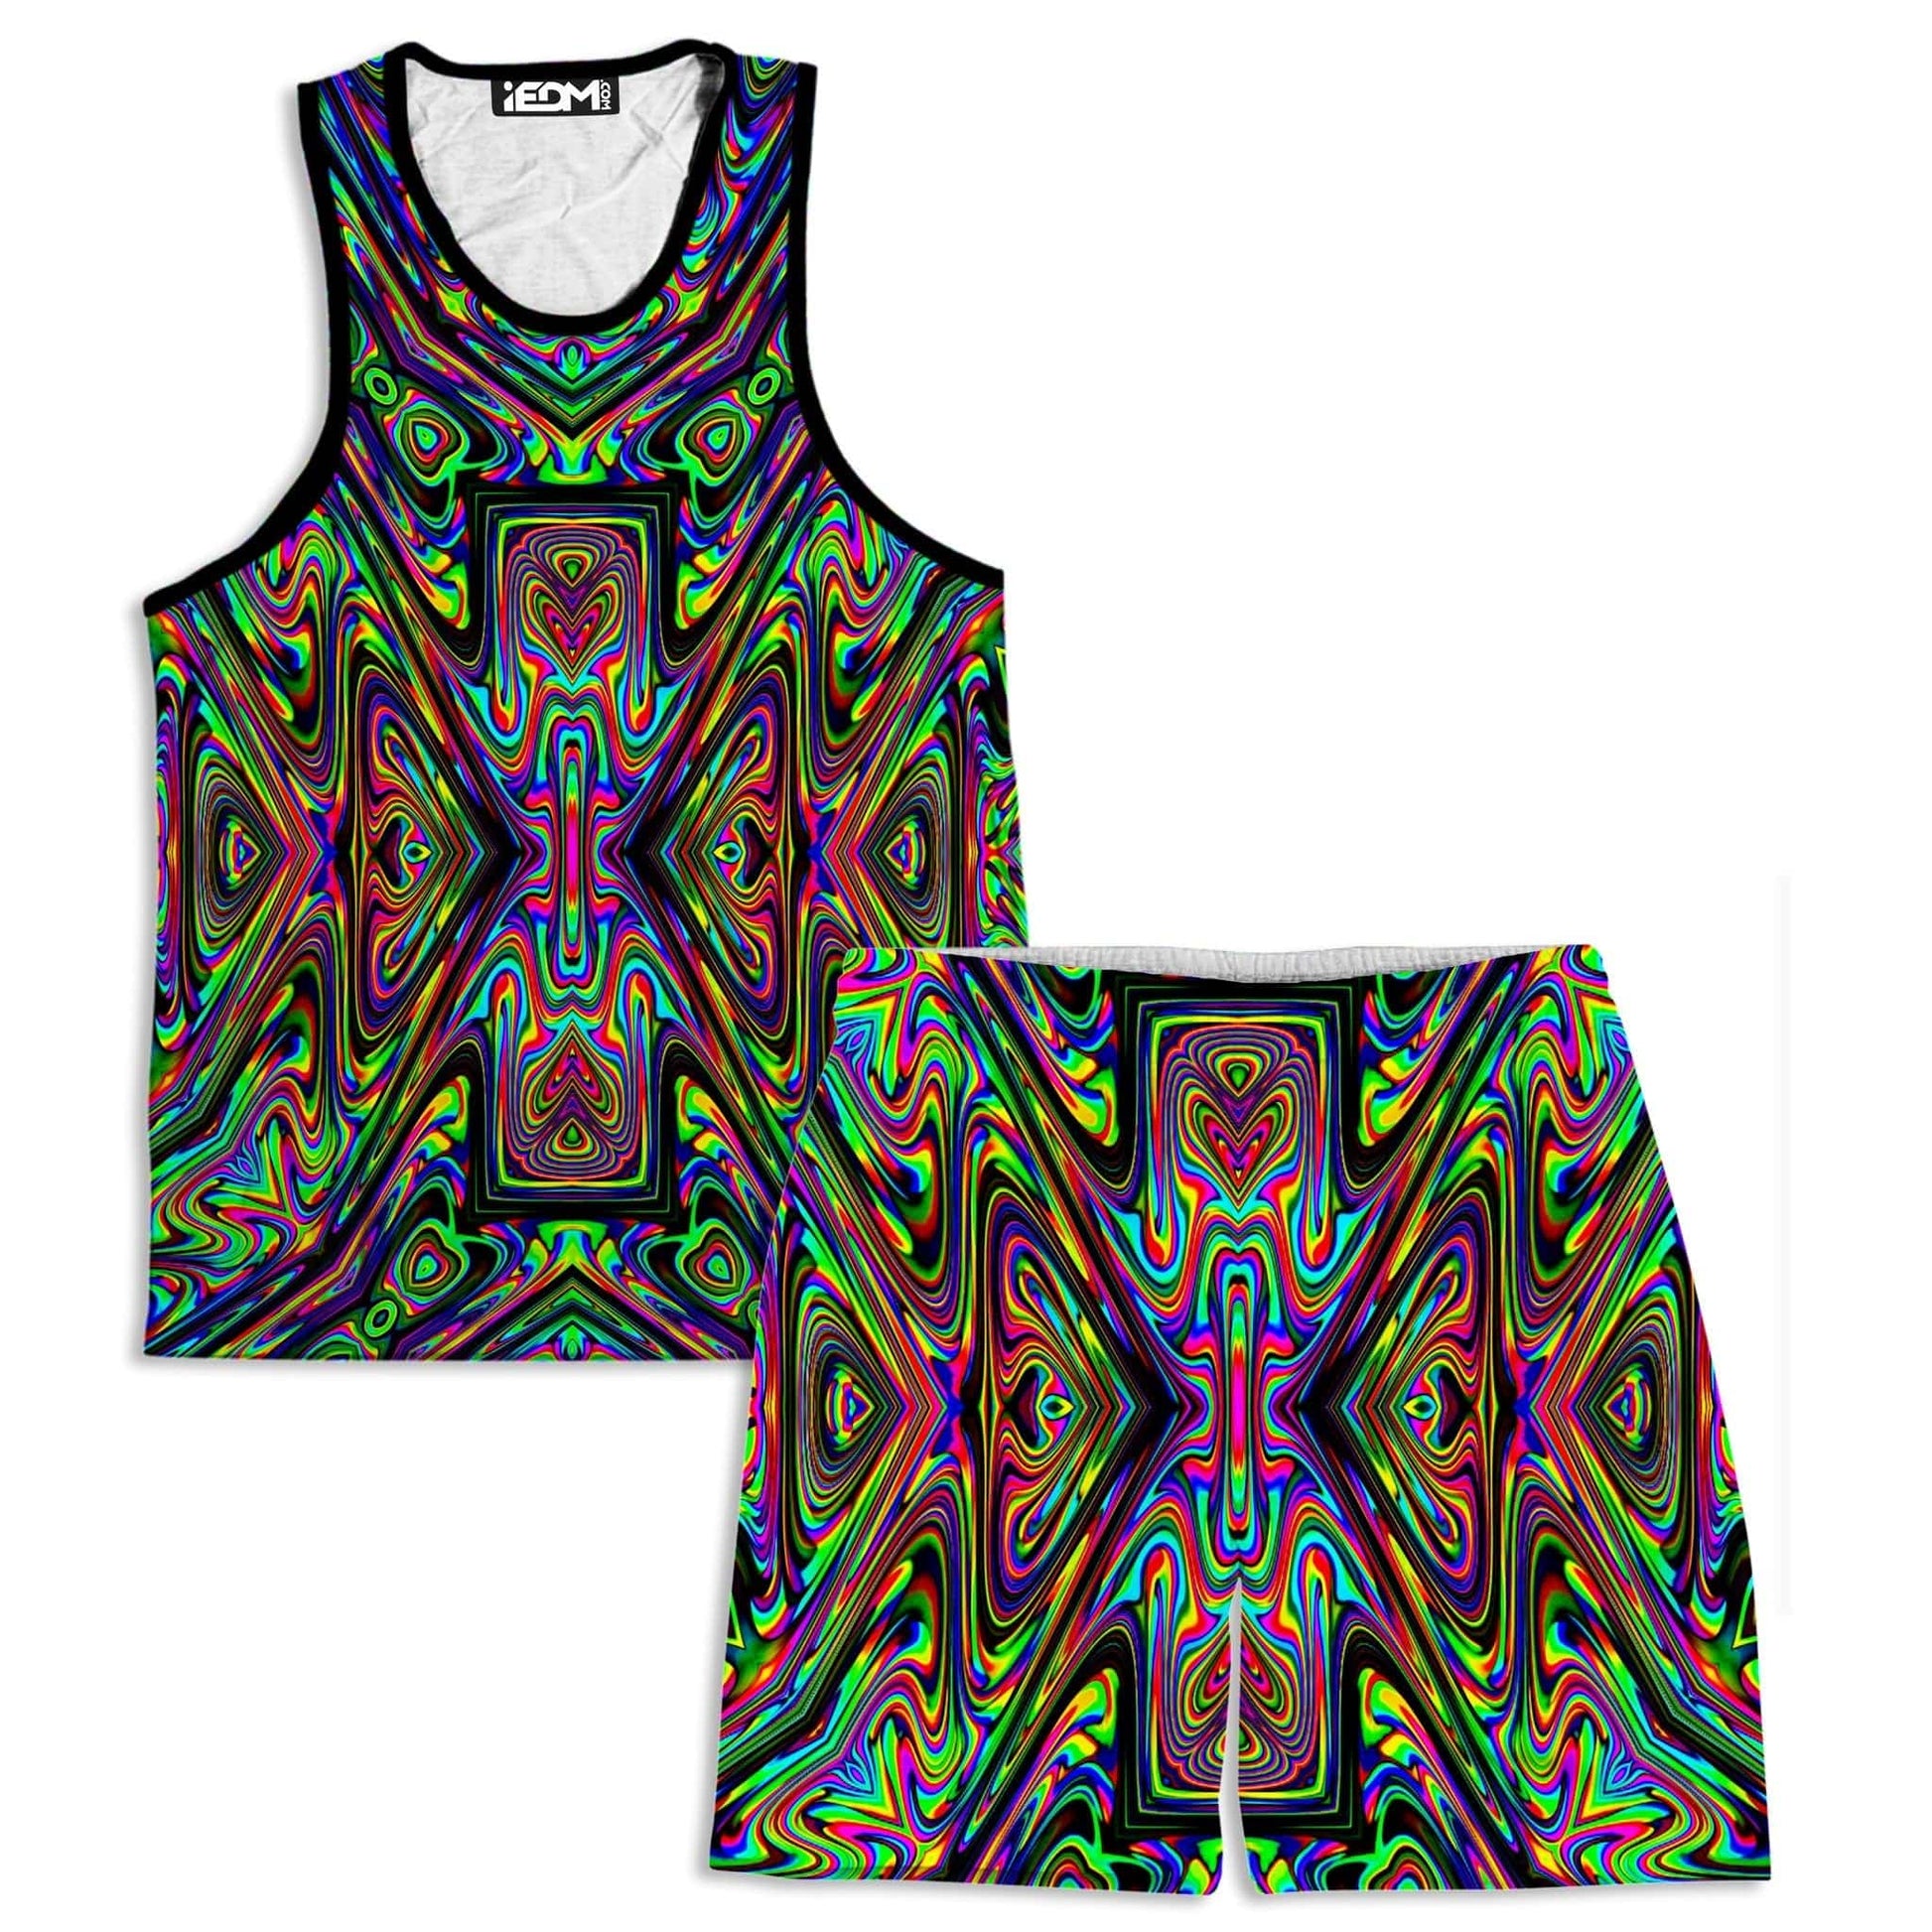 50mg Men's Tank and Shorts Combo, Glass Prism Studios, | iEDM